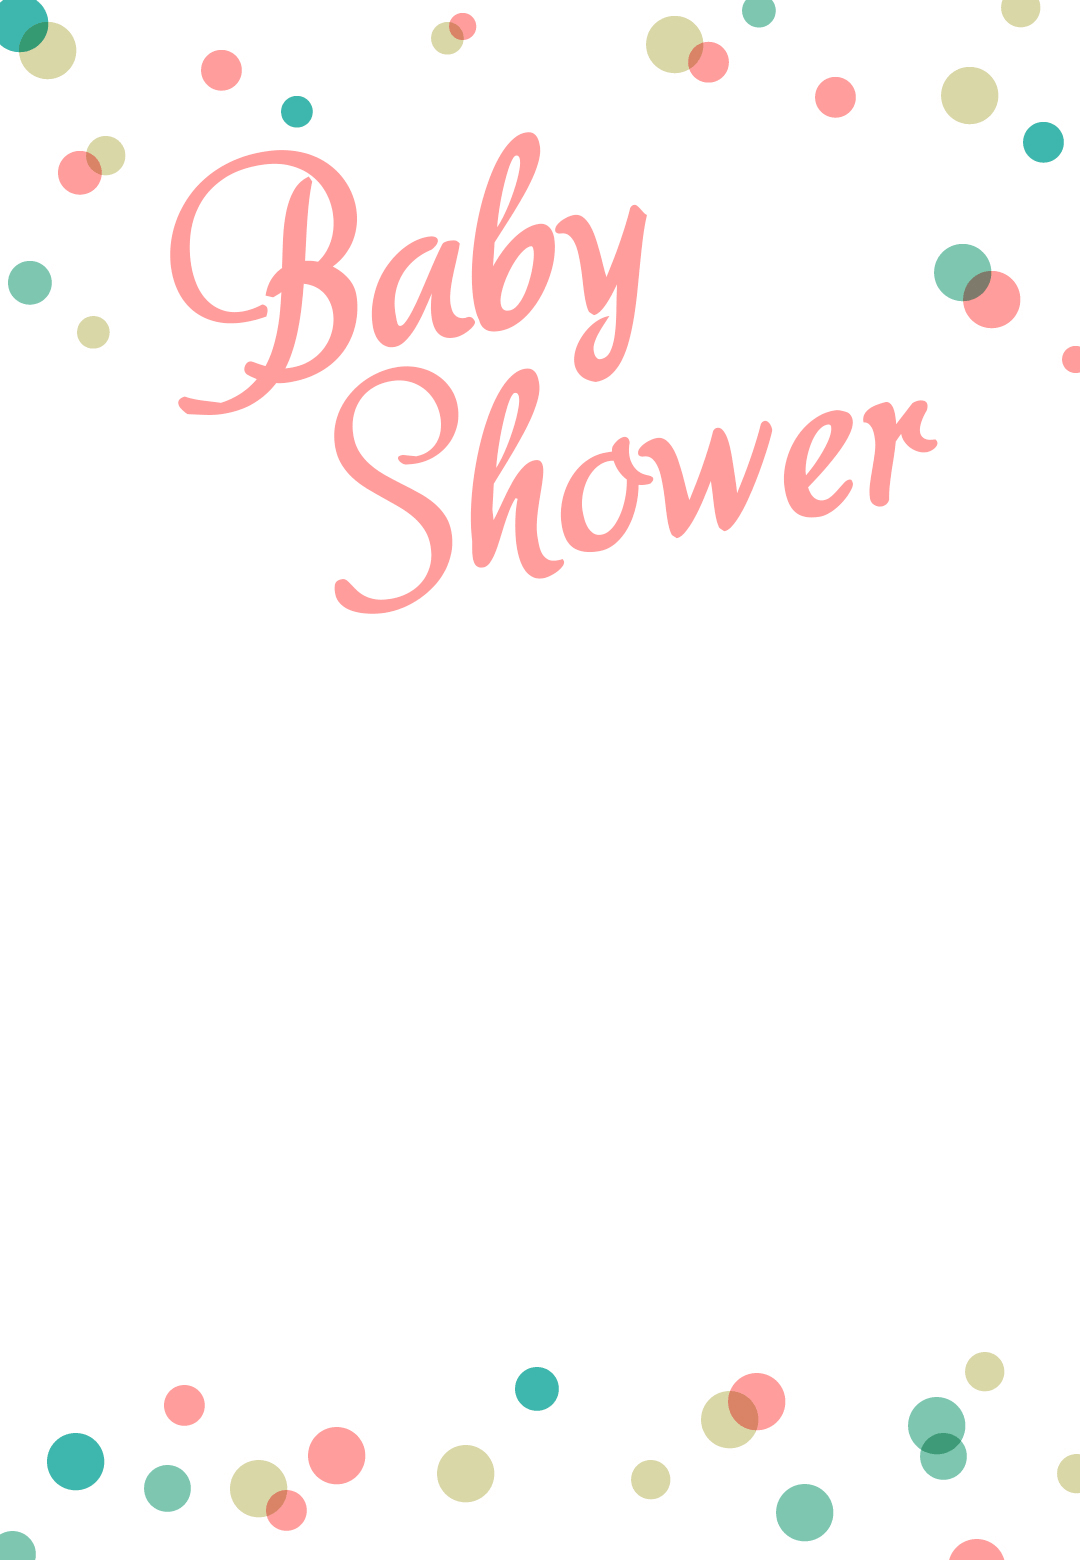 free-printable-baby-shower-borders-clipart-baby-girl-borders-20-free